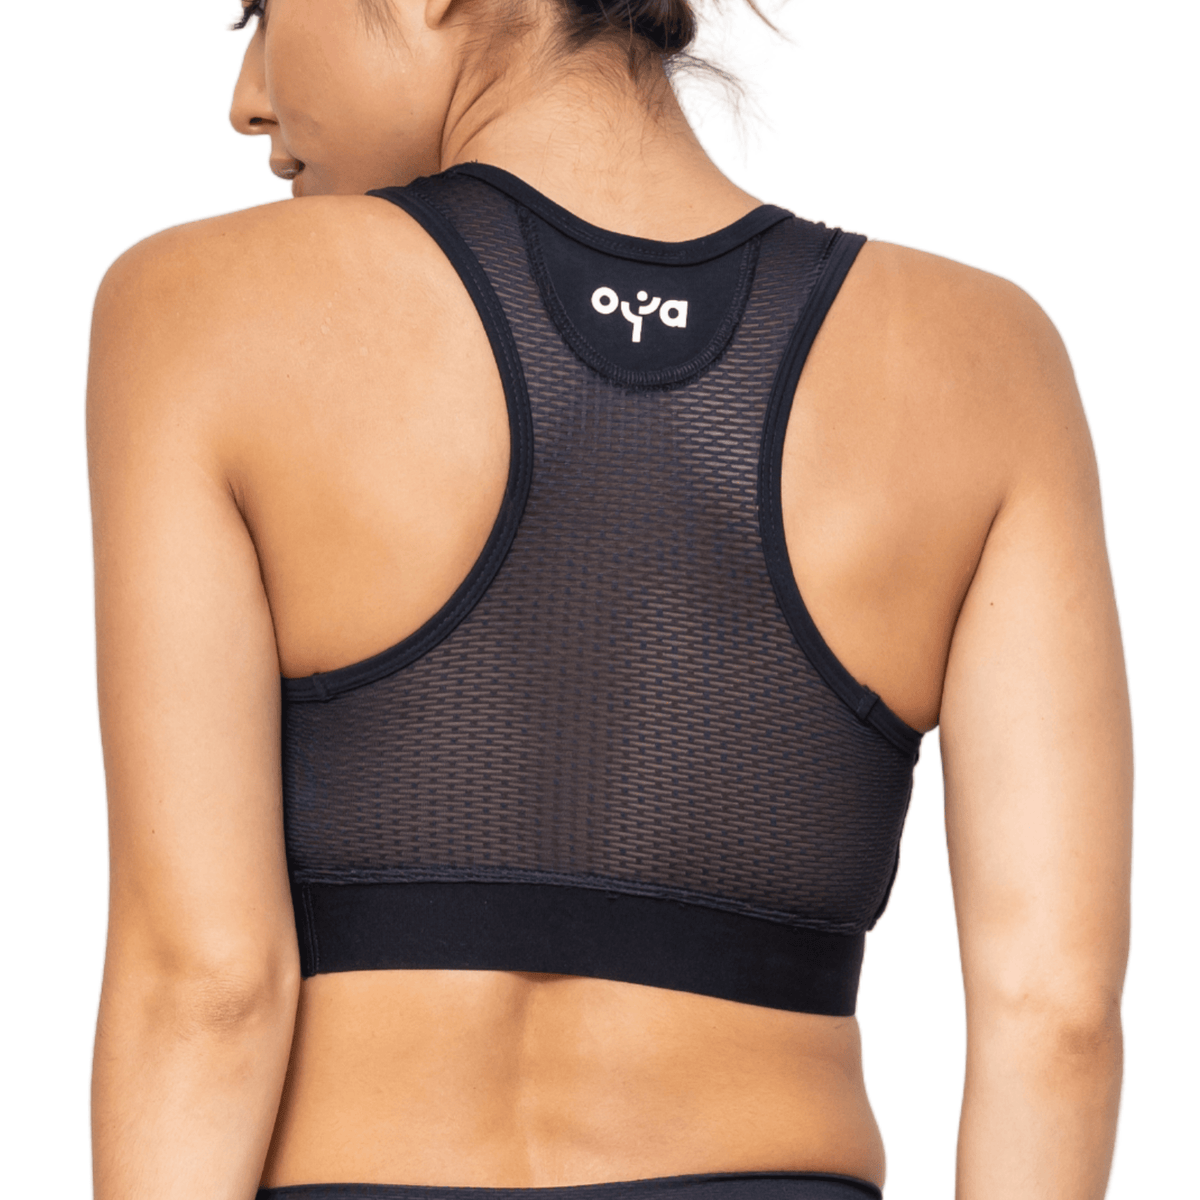 Asics Womens Cooling Sports Bras - Get Best Price from